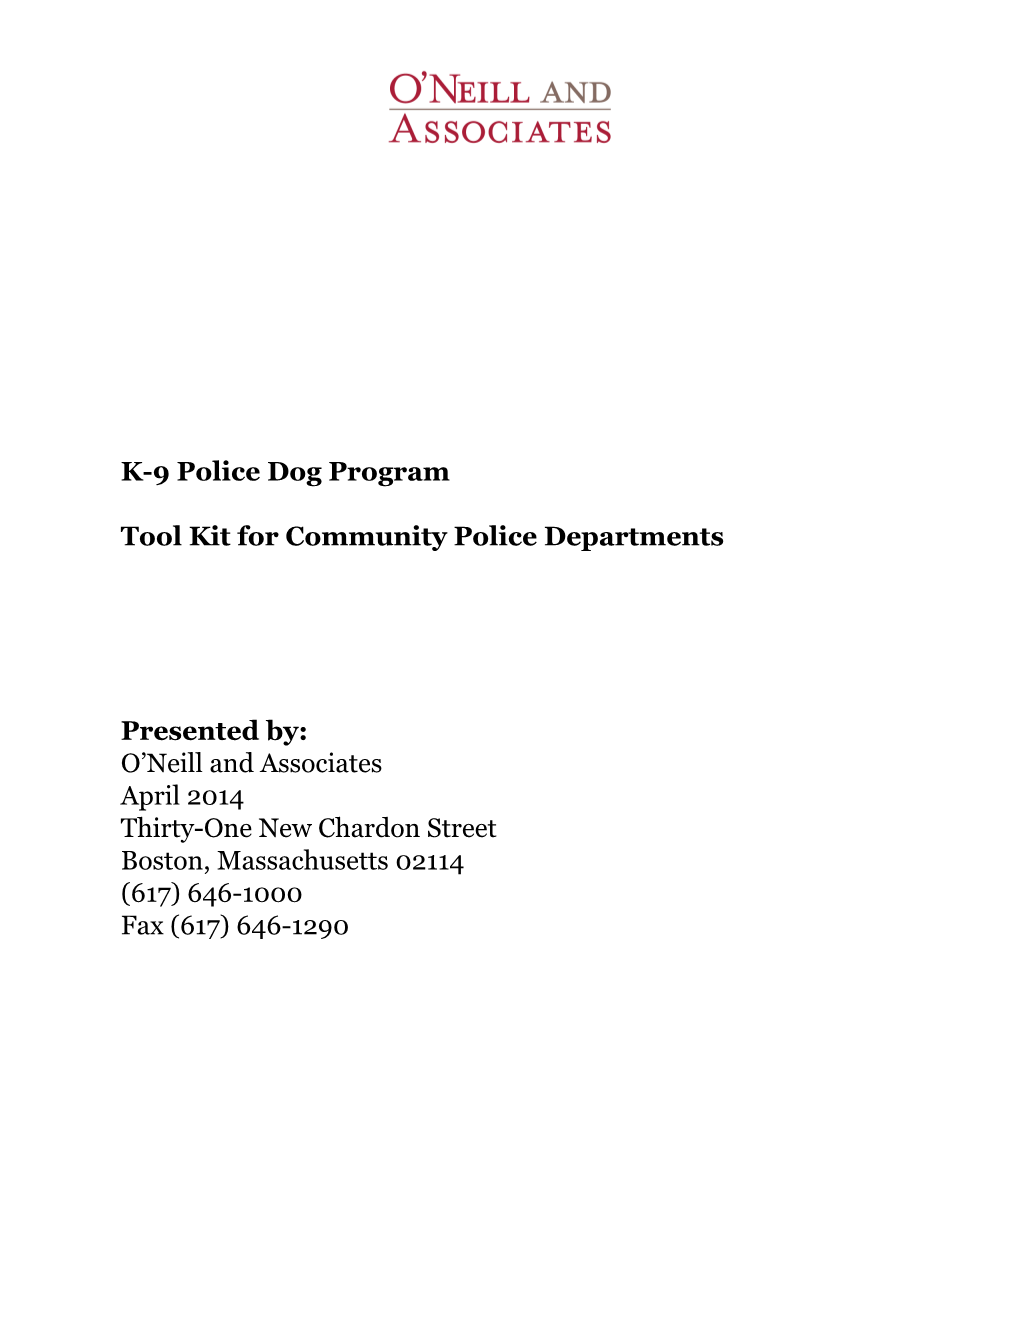 Tool Kit for Community Police Departments